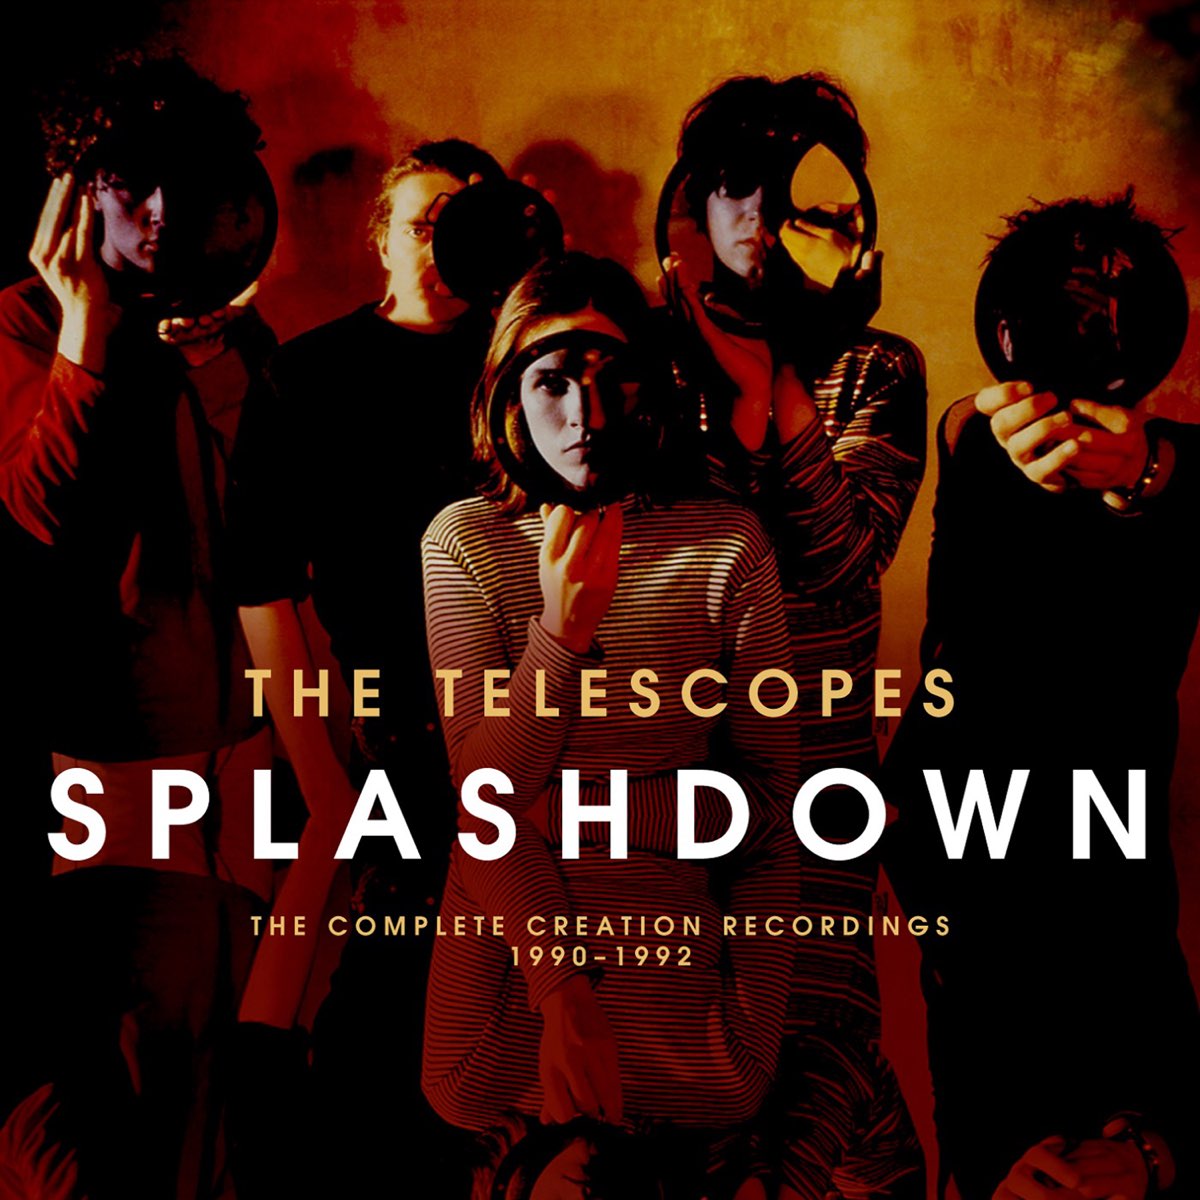 Splashdown The Complete Creation Recordings 1990-1992 by The Telescopes on  Apple Music